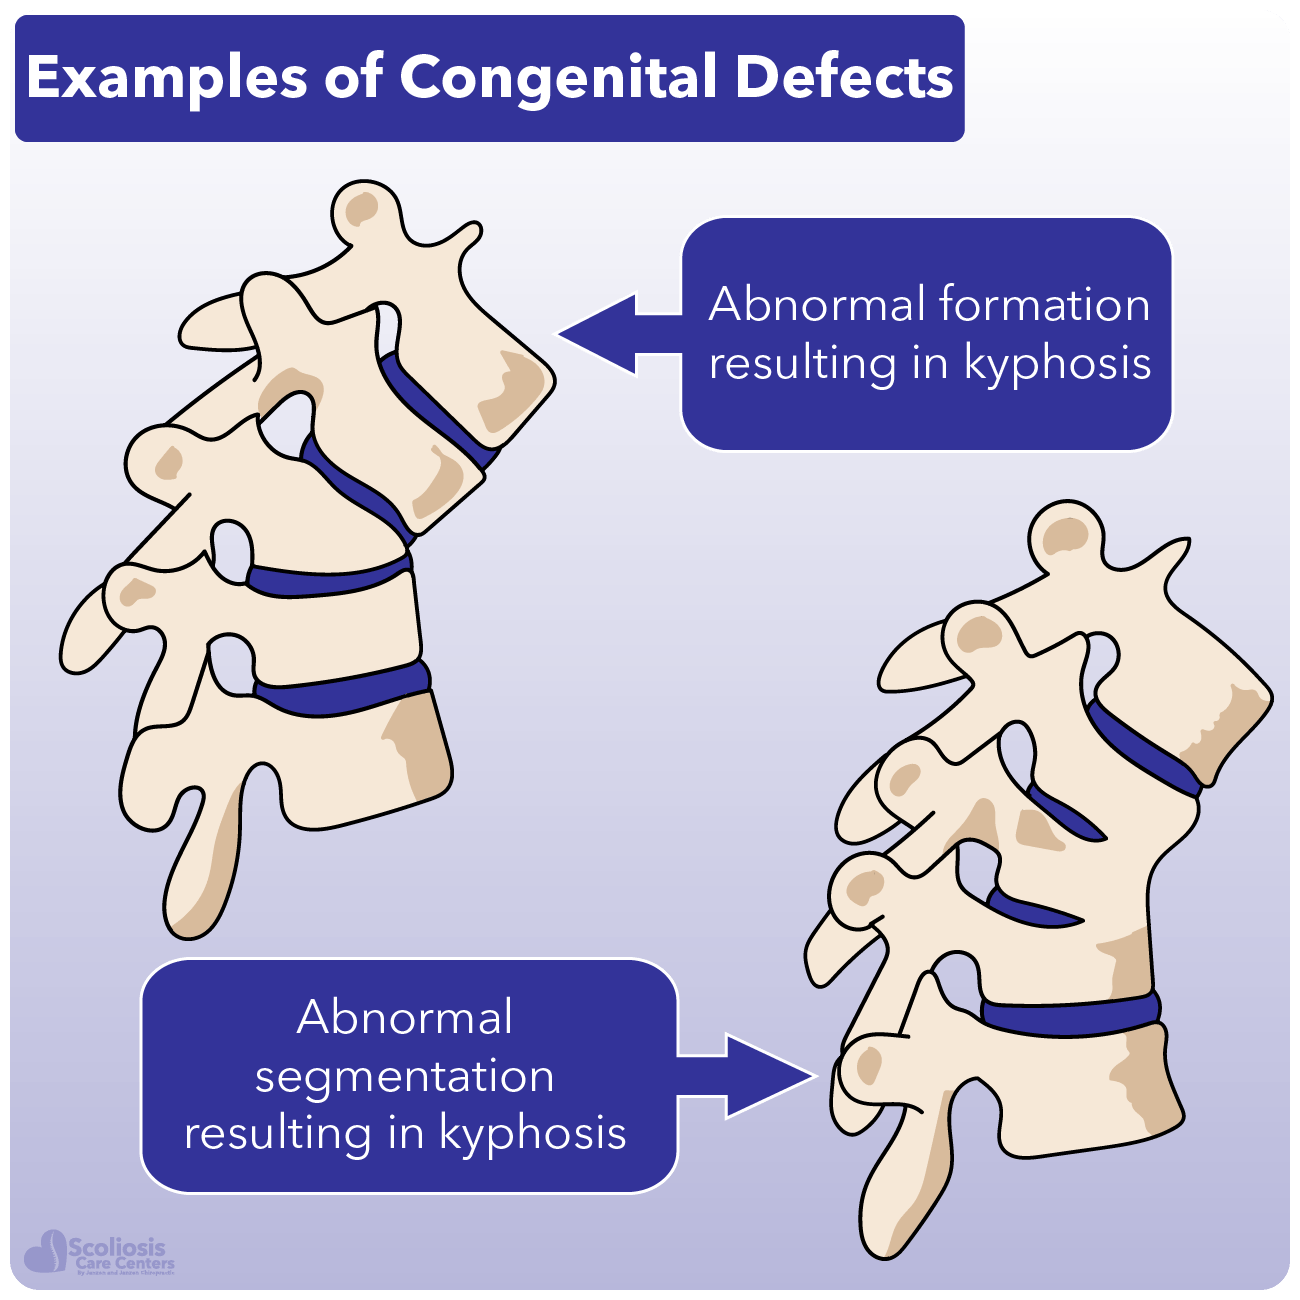 congenital defects causing kyphosis 8